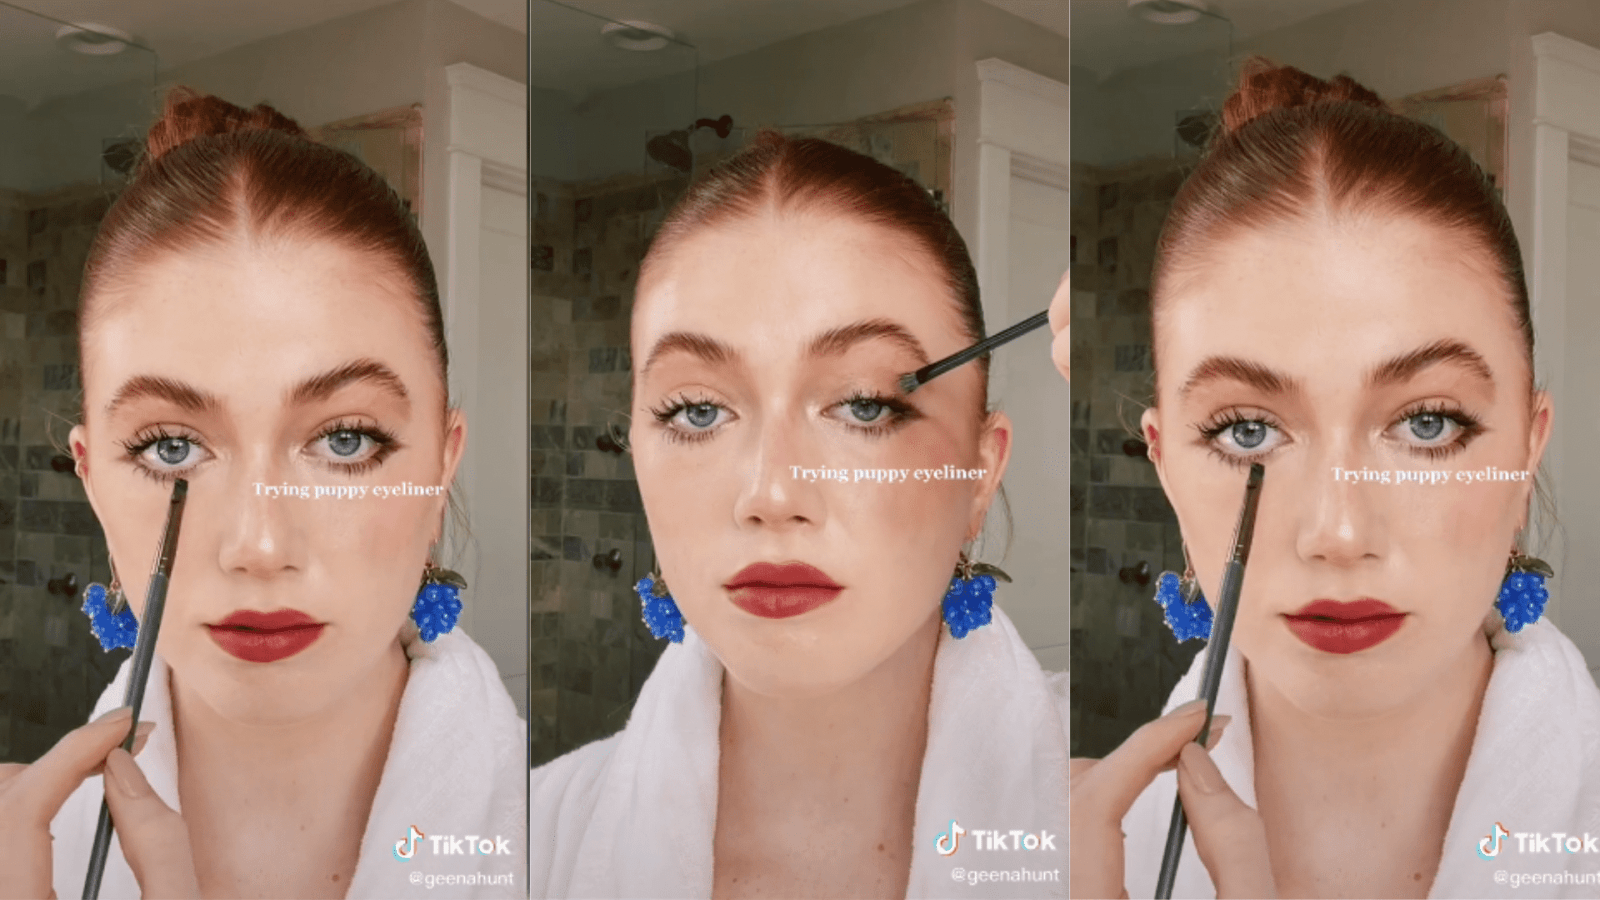 Puppy Eyeliner Is The TikTok Trend Redheads Need To Try